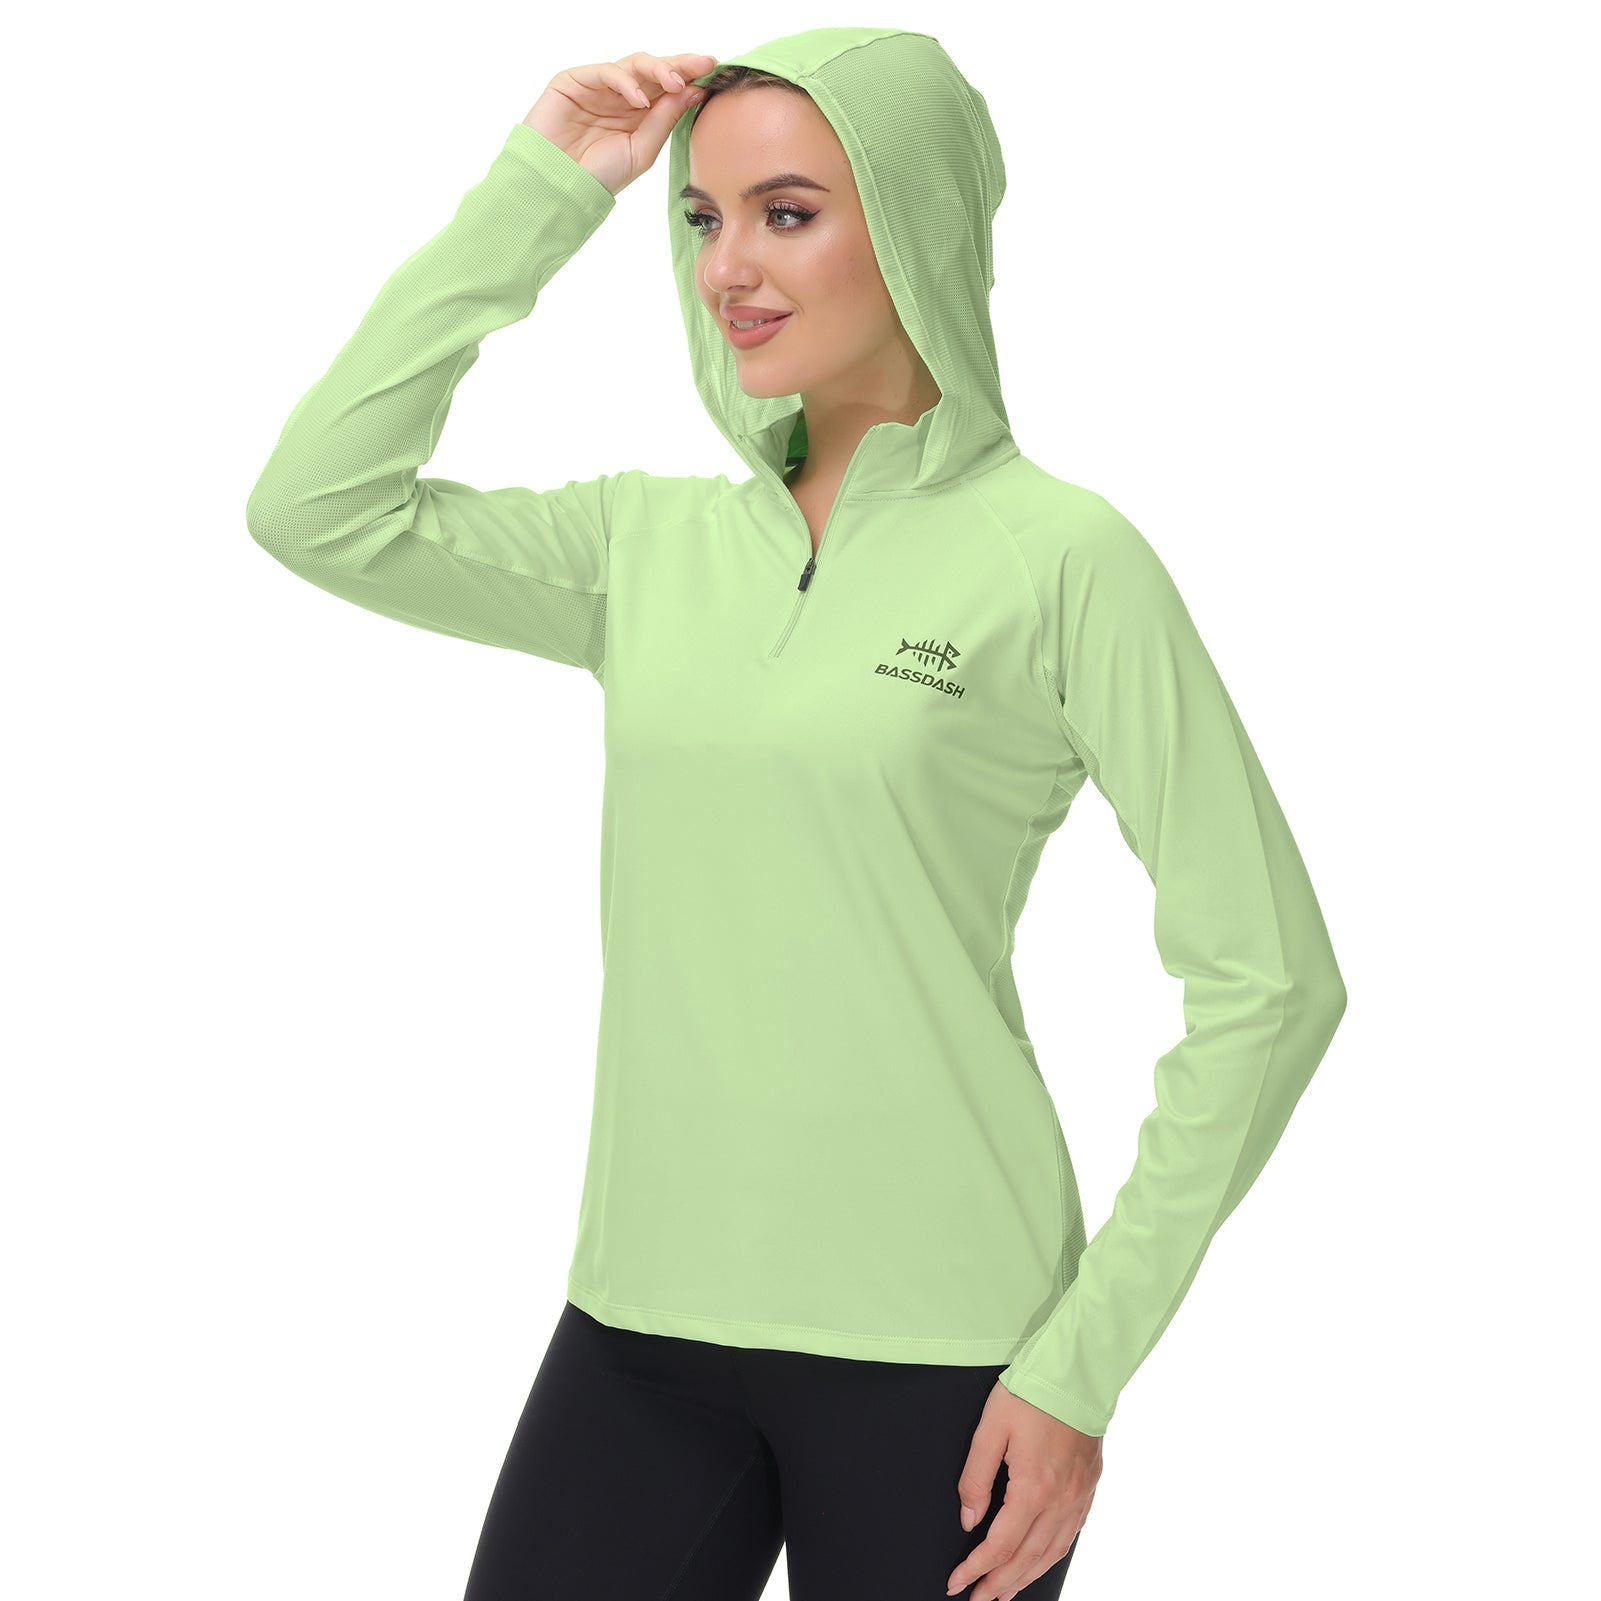 Clothe Co. Quarter Zip Pullover Womens Lightweight Athletic